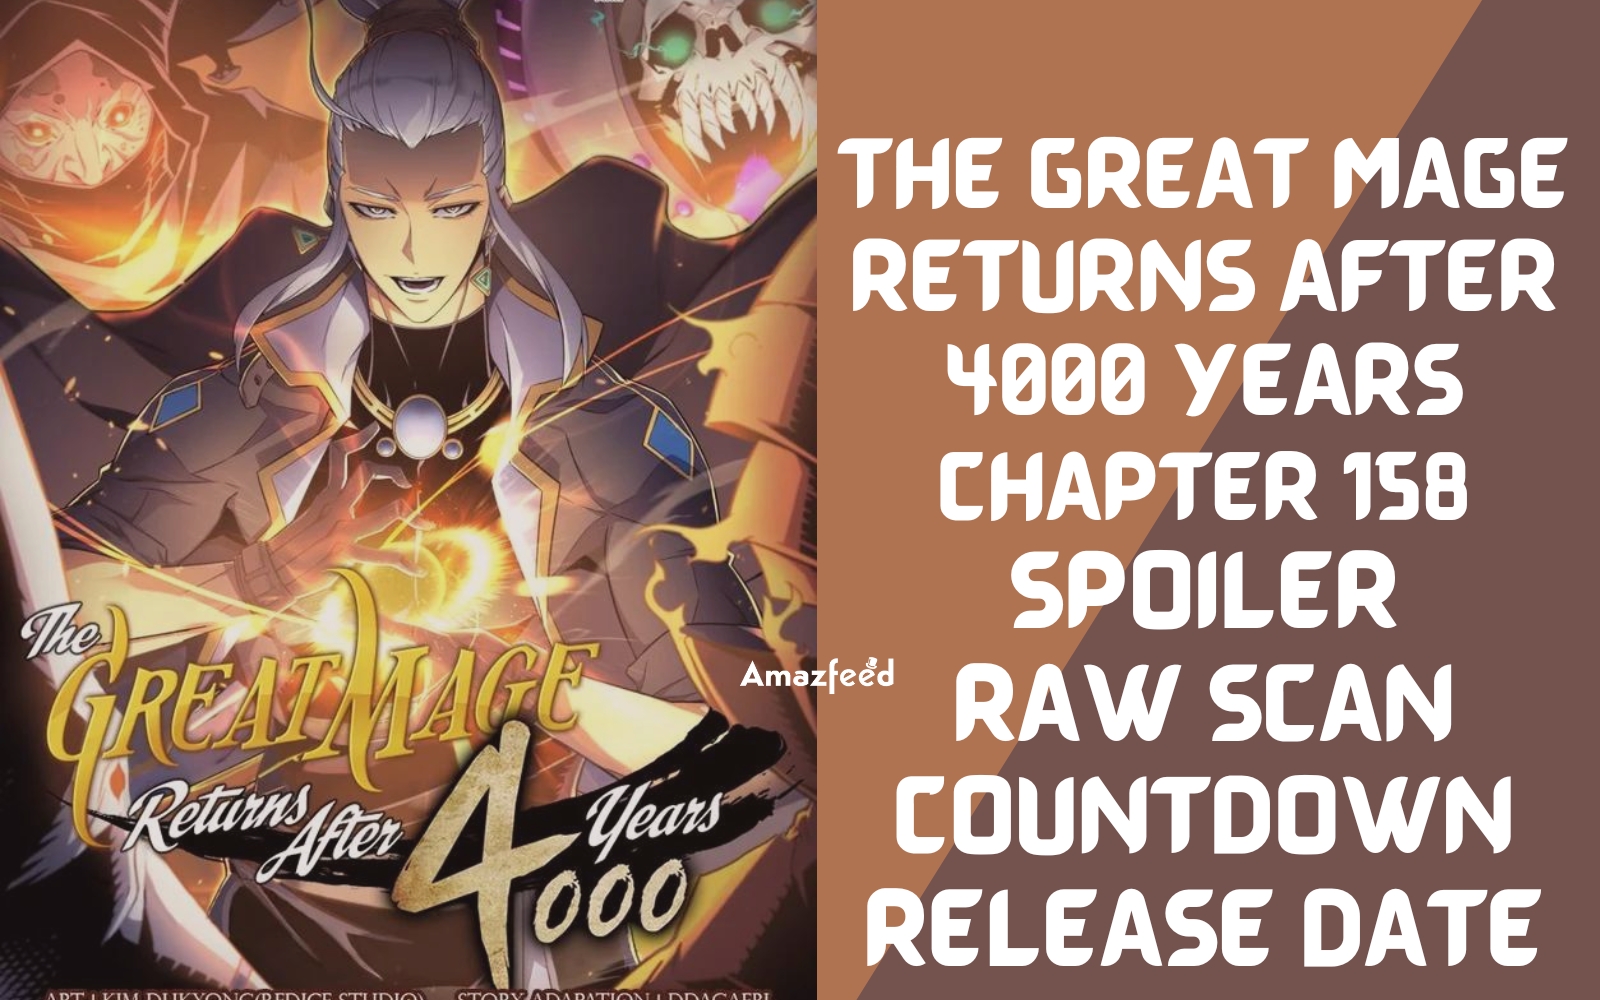 The Great Mage Returns After 4000 Years Chapter 158 Spoiler, Raw Scan, Release Date, Color Page